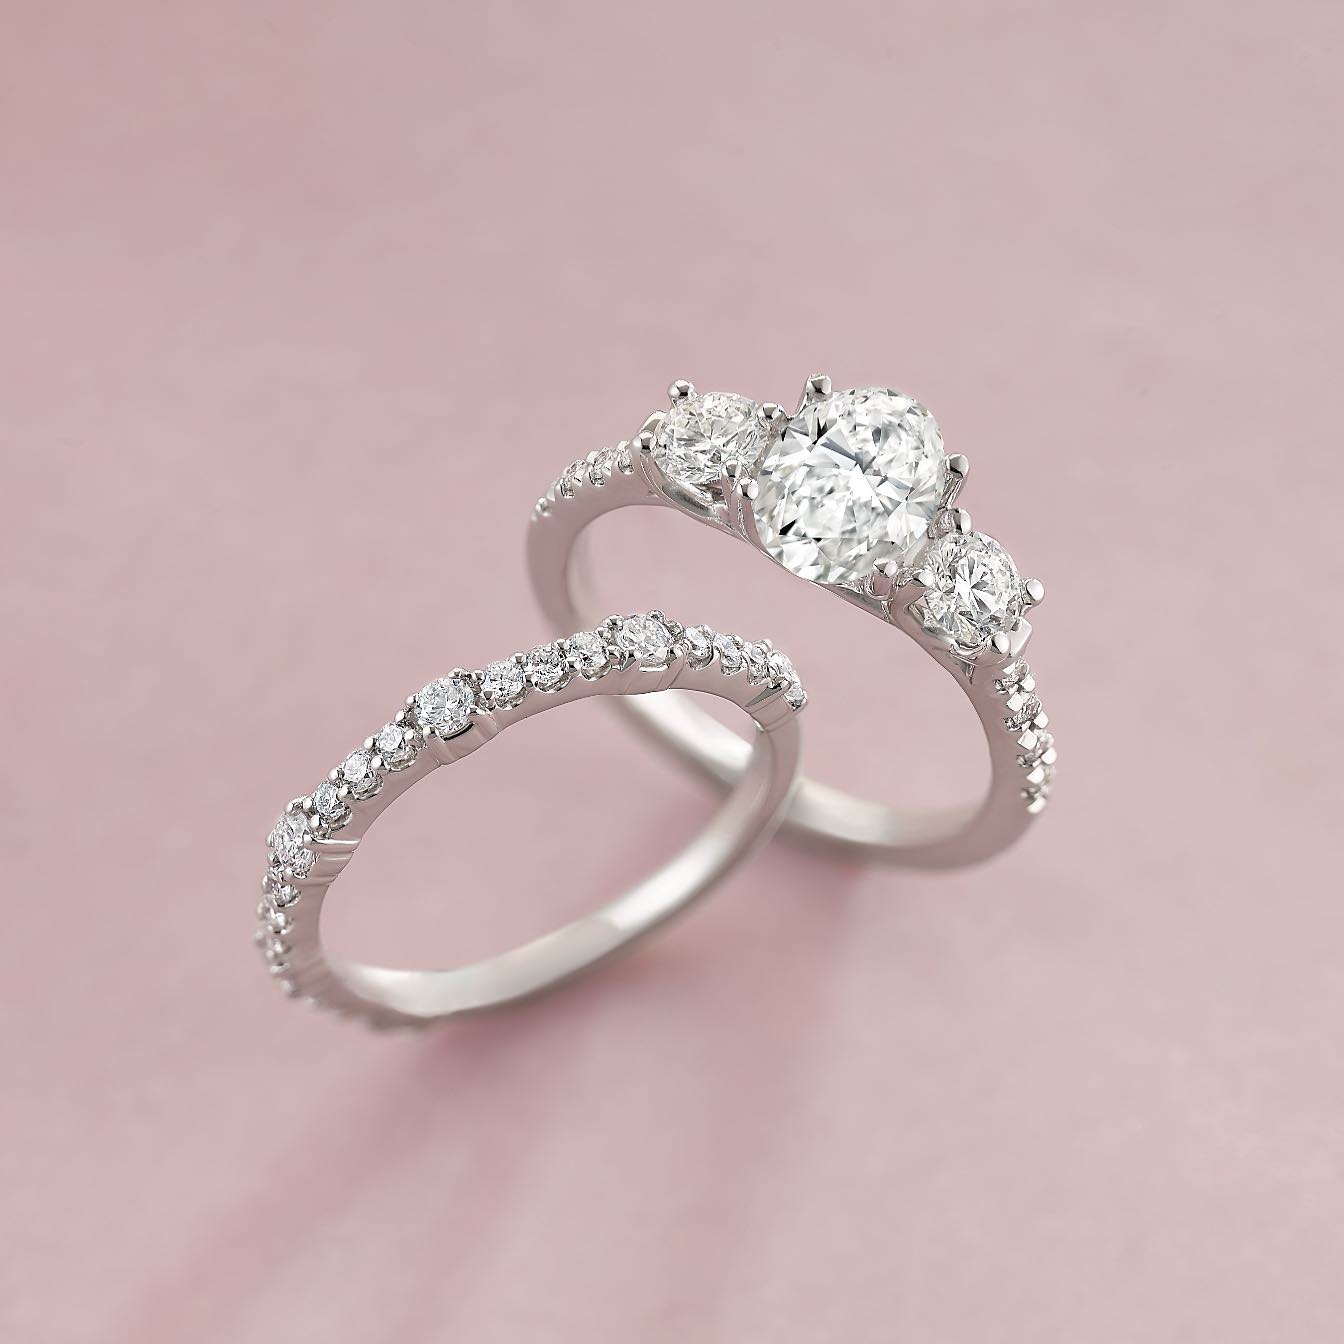 choosing an ethical and sustainable engagement ring: the case for lab-grown diamonds